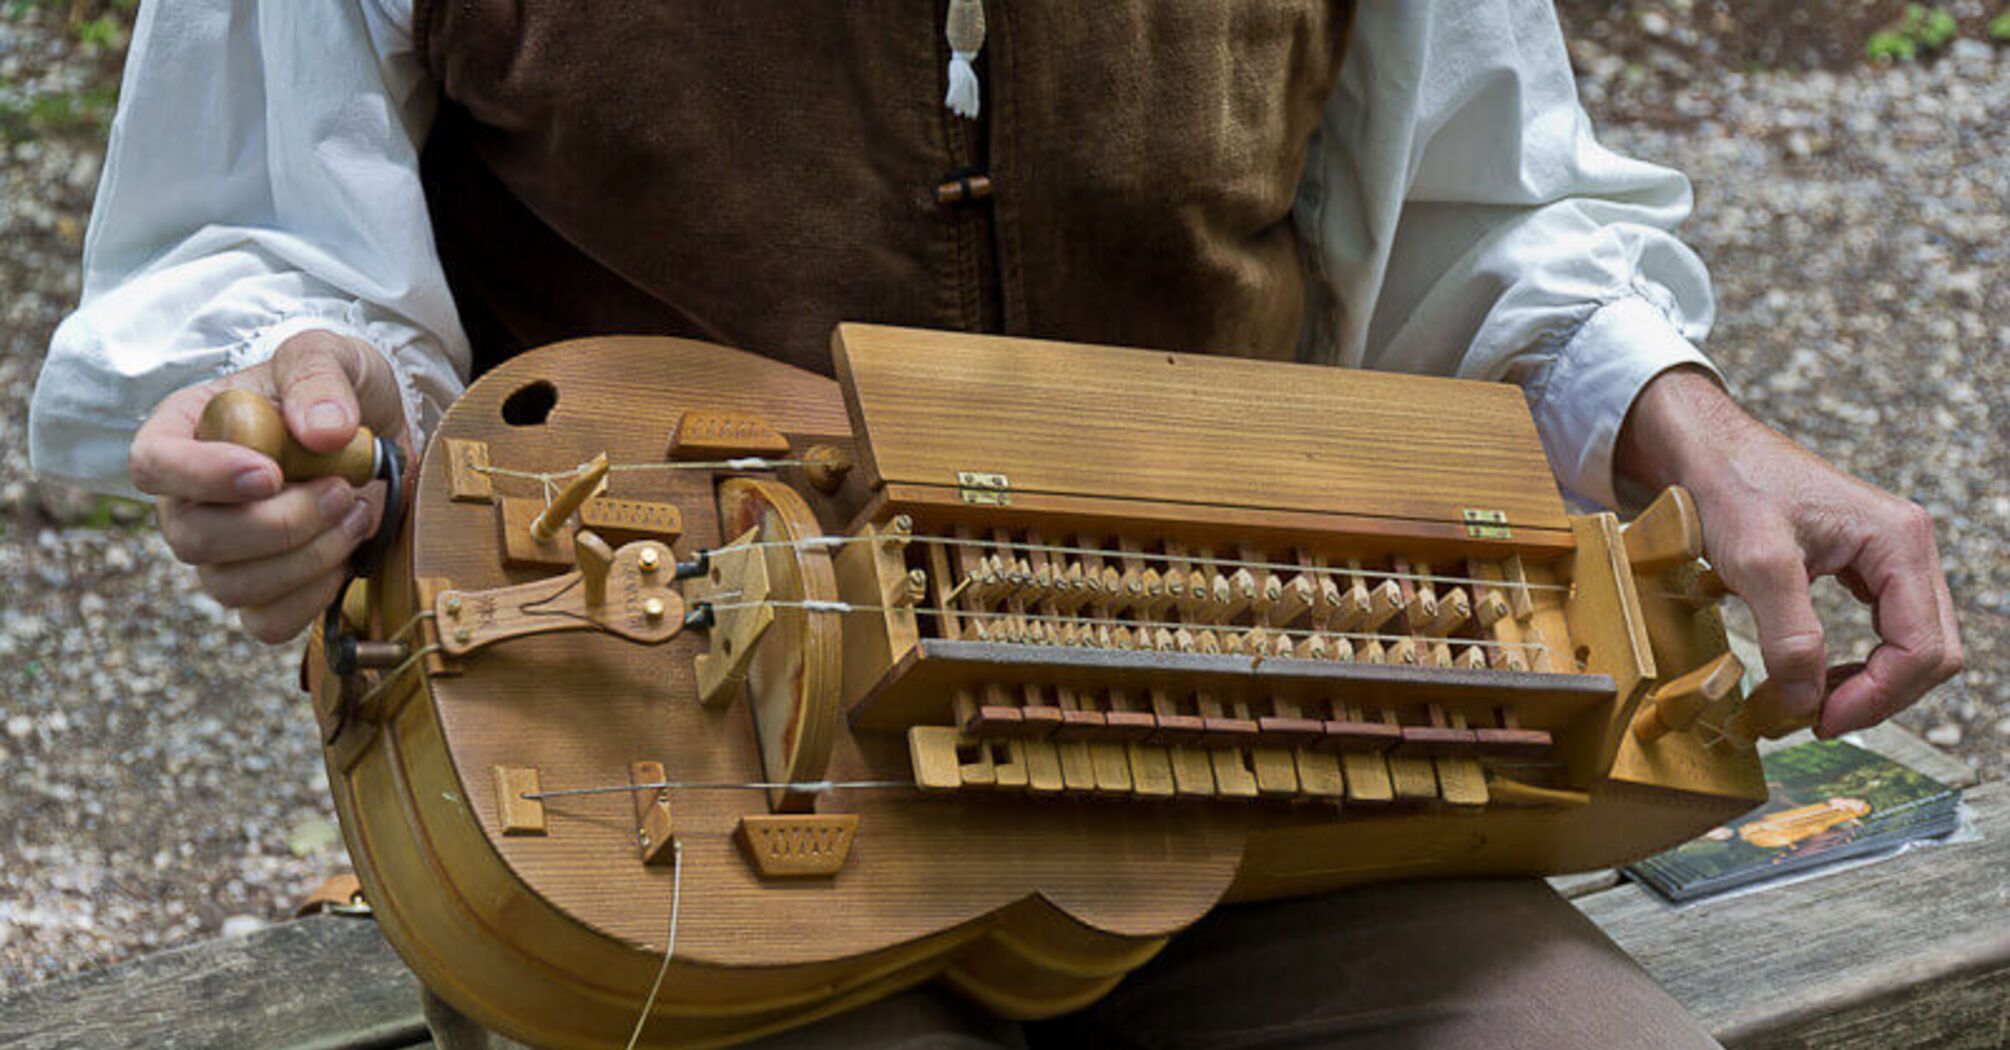 5 rare and little-known musical instruments